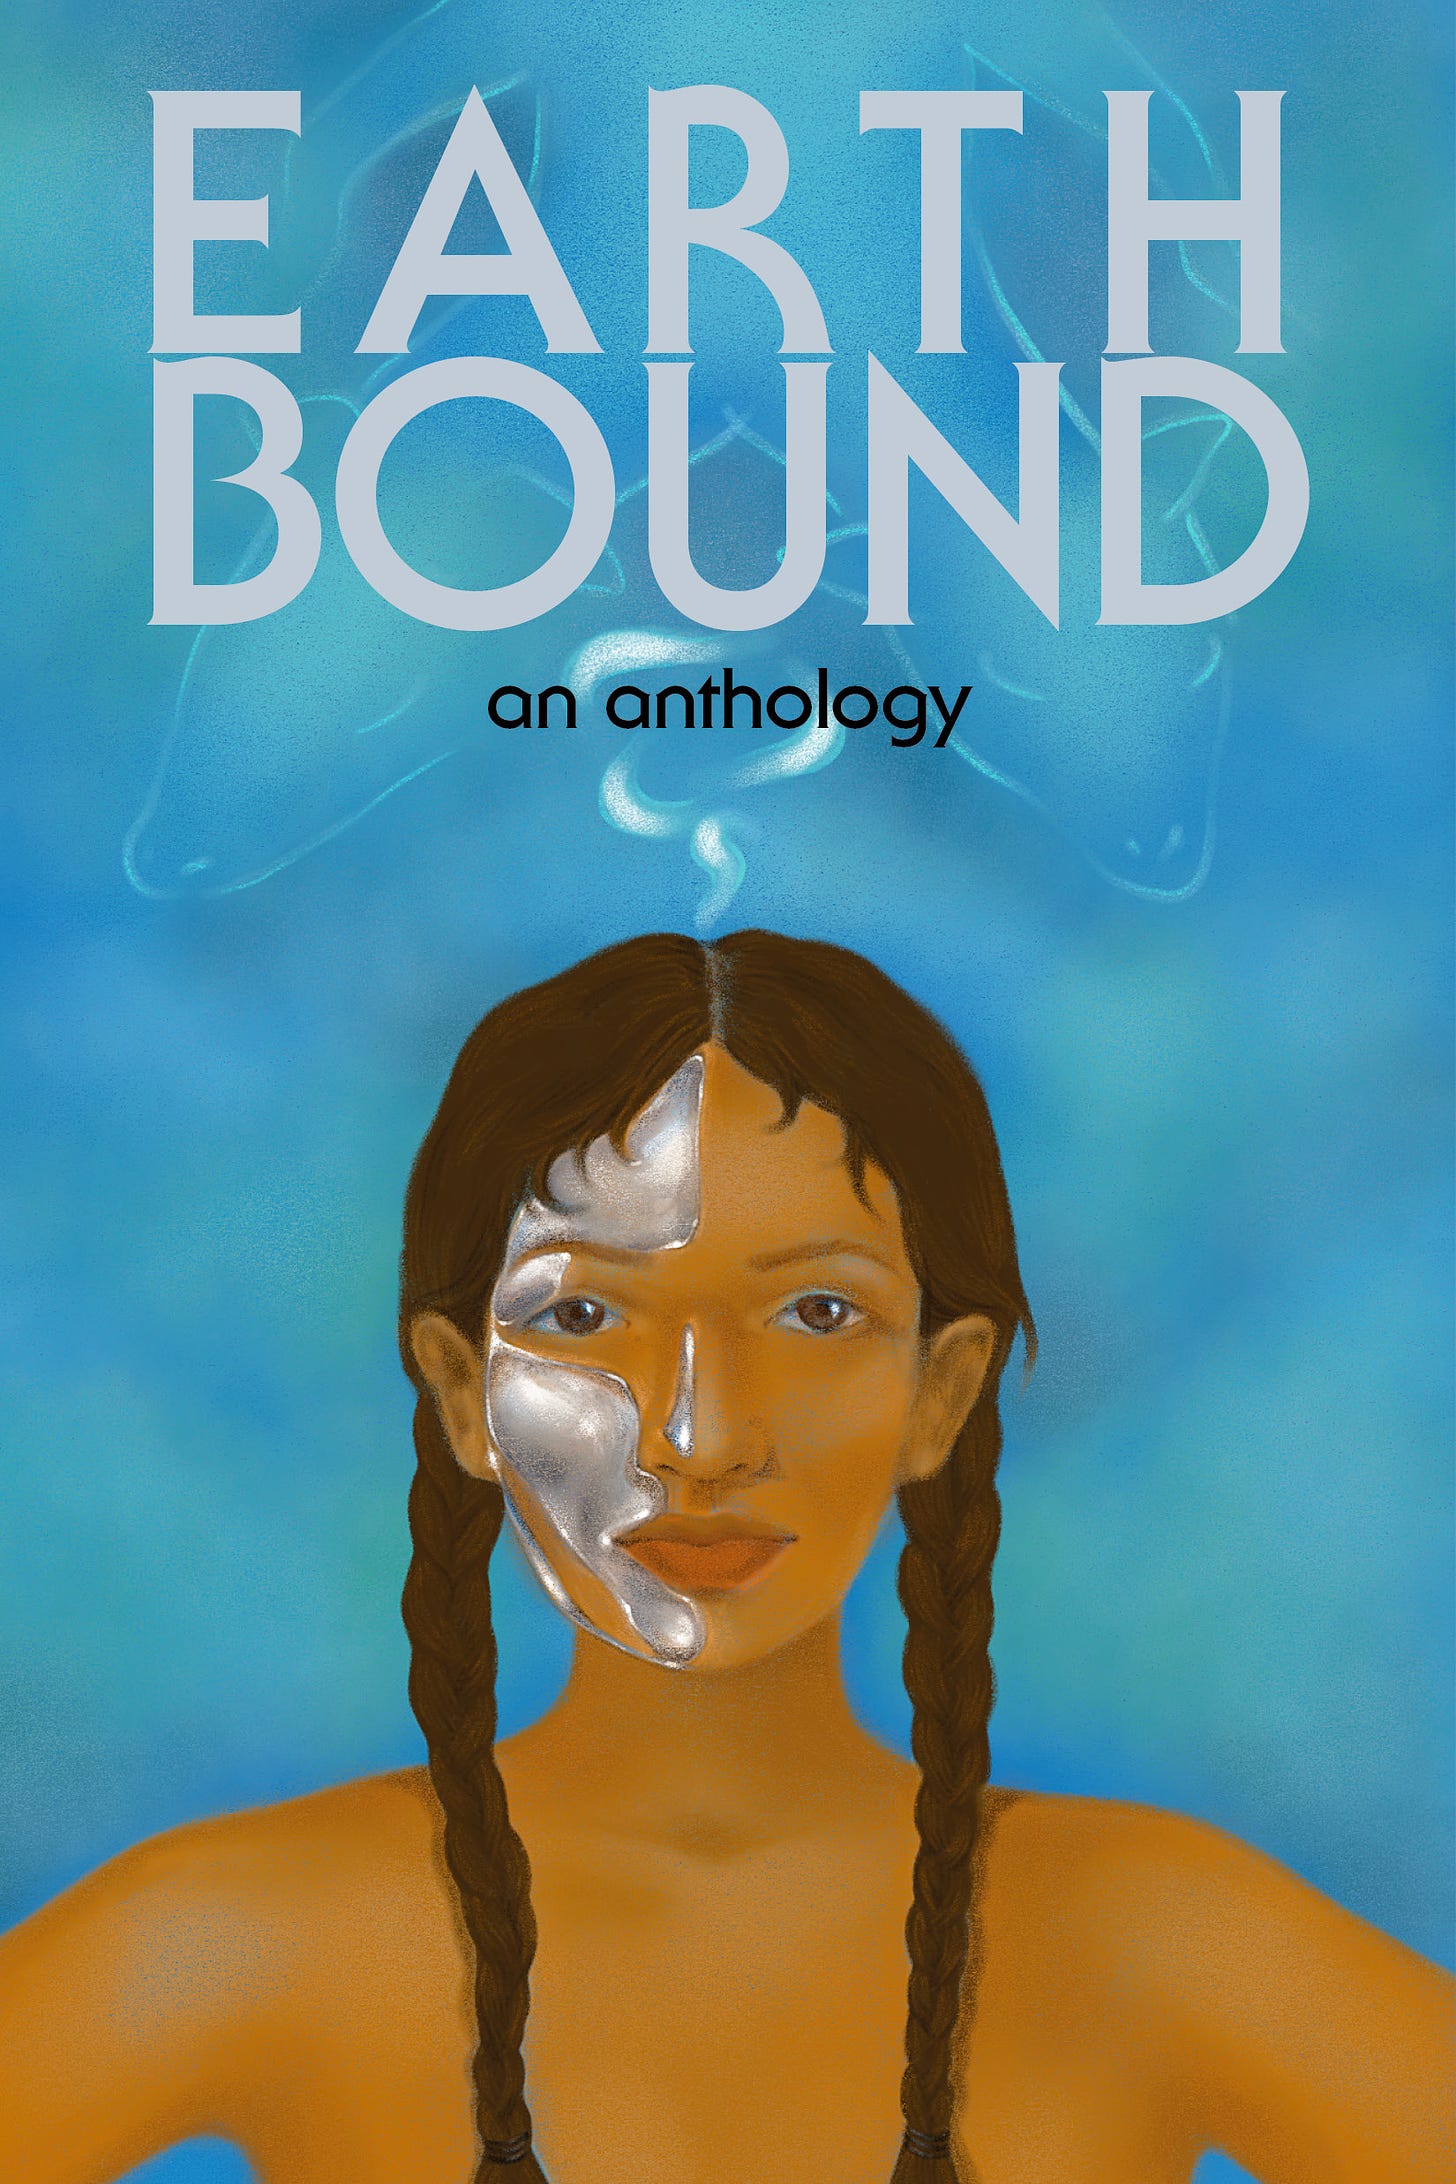 A digital painting of an Indigenous woman in her mid-thirties. She has brown skin, hair, and eyes. The right side of her face is metal. She occupies the lower half of the painting. A ghost hovers above her head, taking the shape of a double-headed deer. The background is a bright blue. 